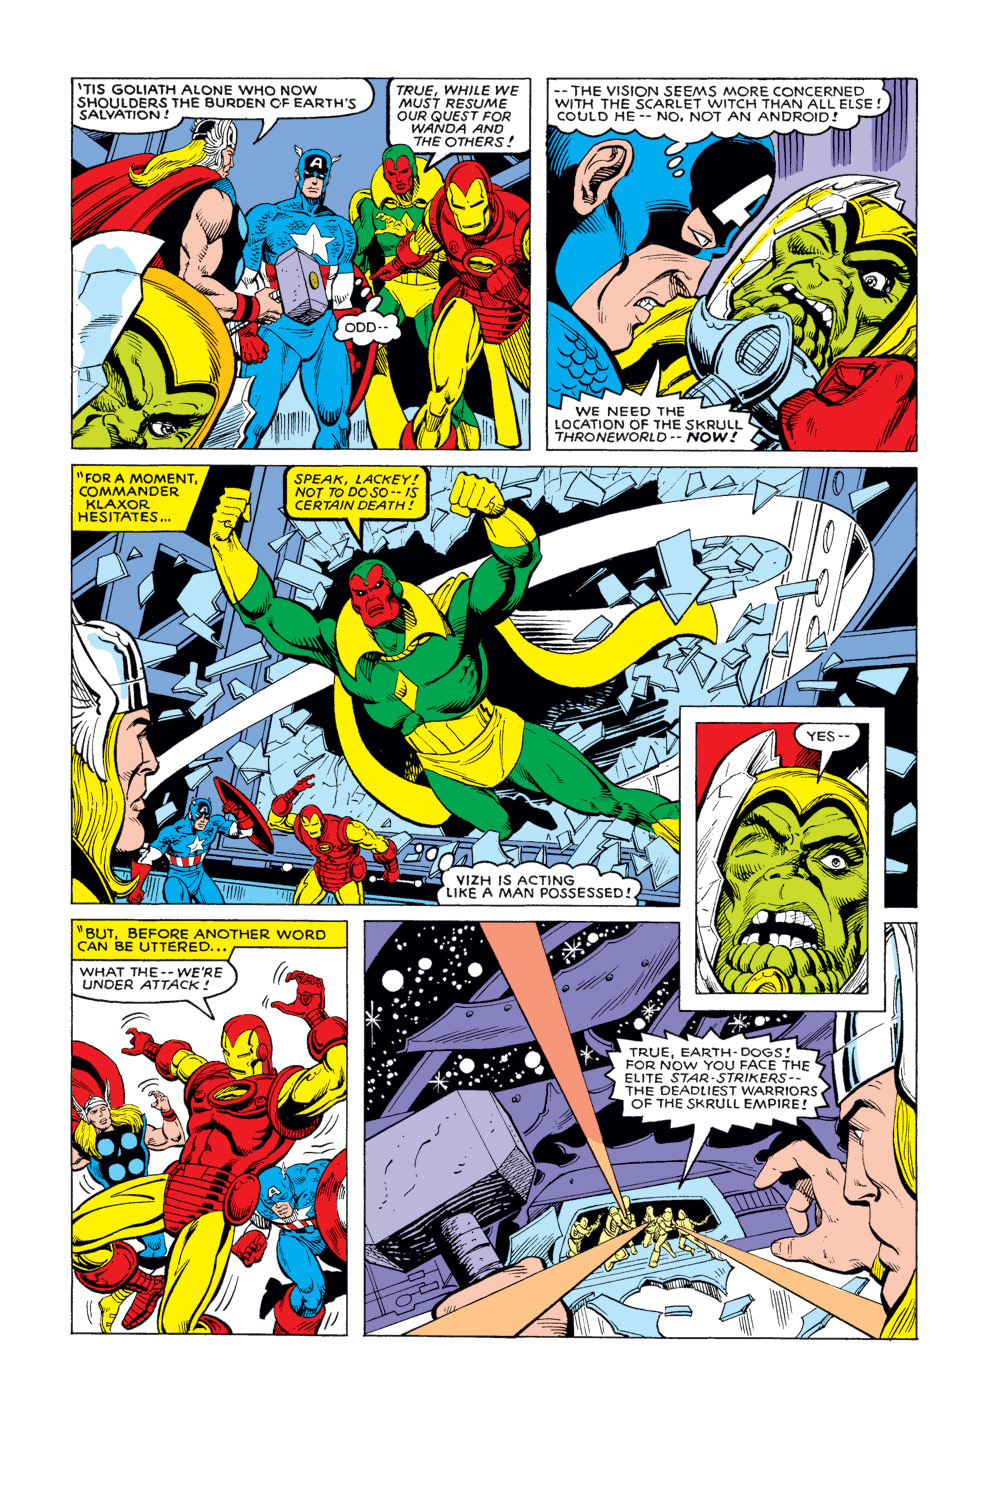 What If? (1977) issue 20 - The Avengers fought the Kree-Skrull war without Rick Jones - Page 9